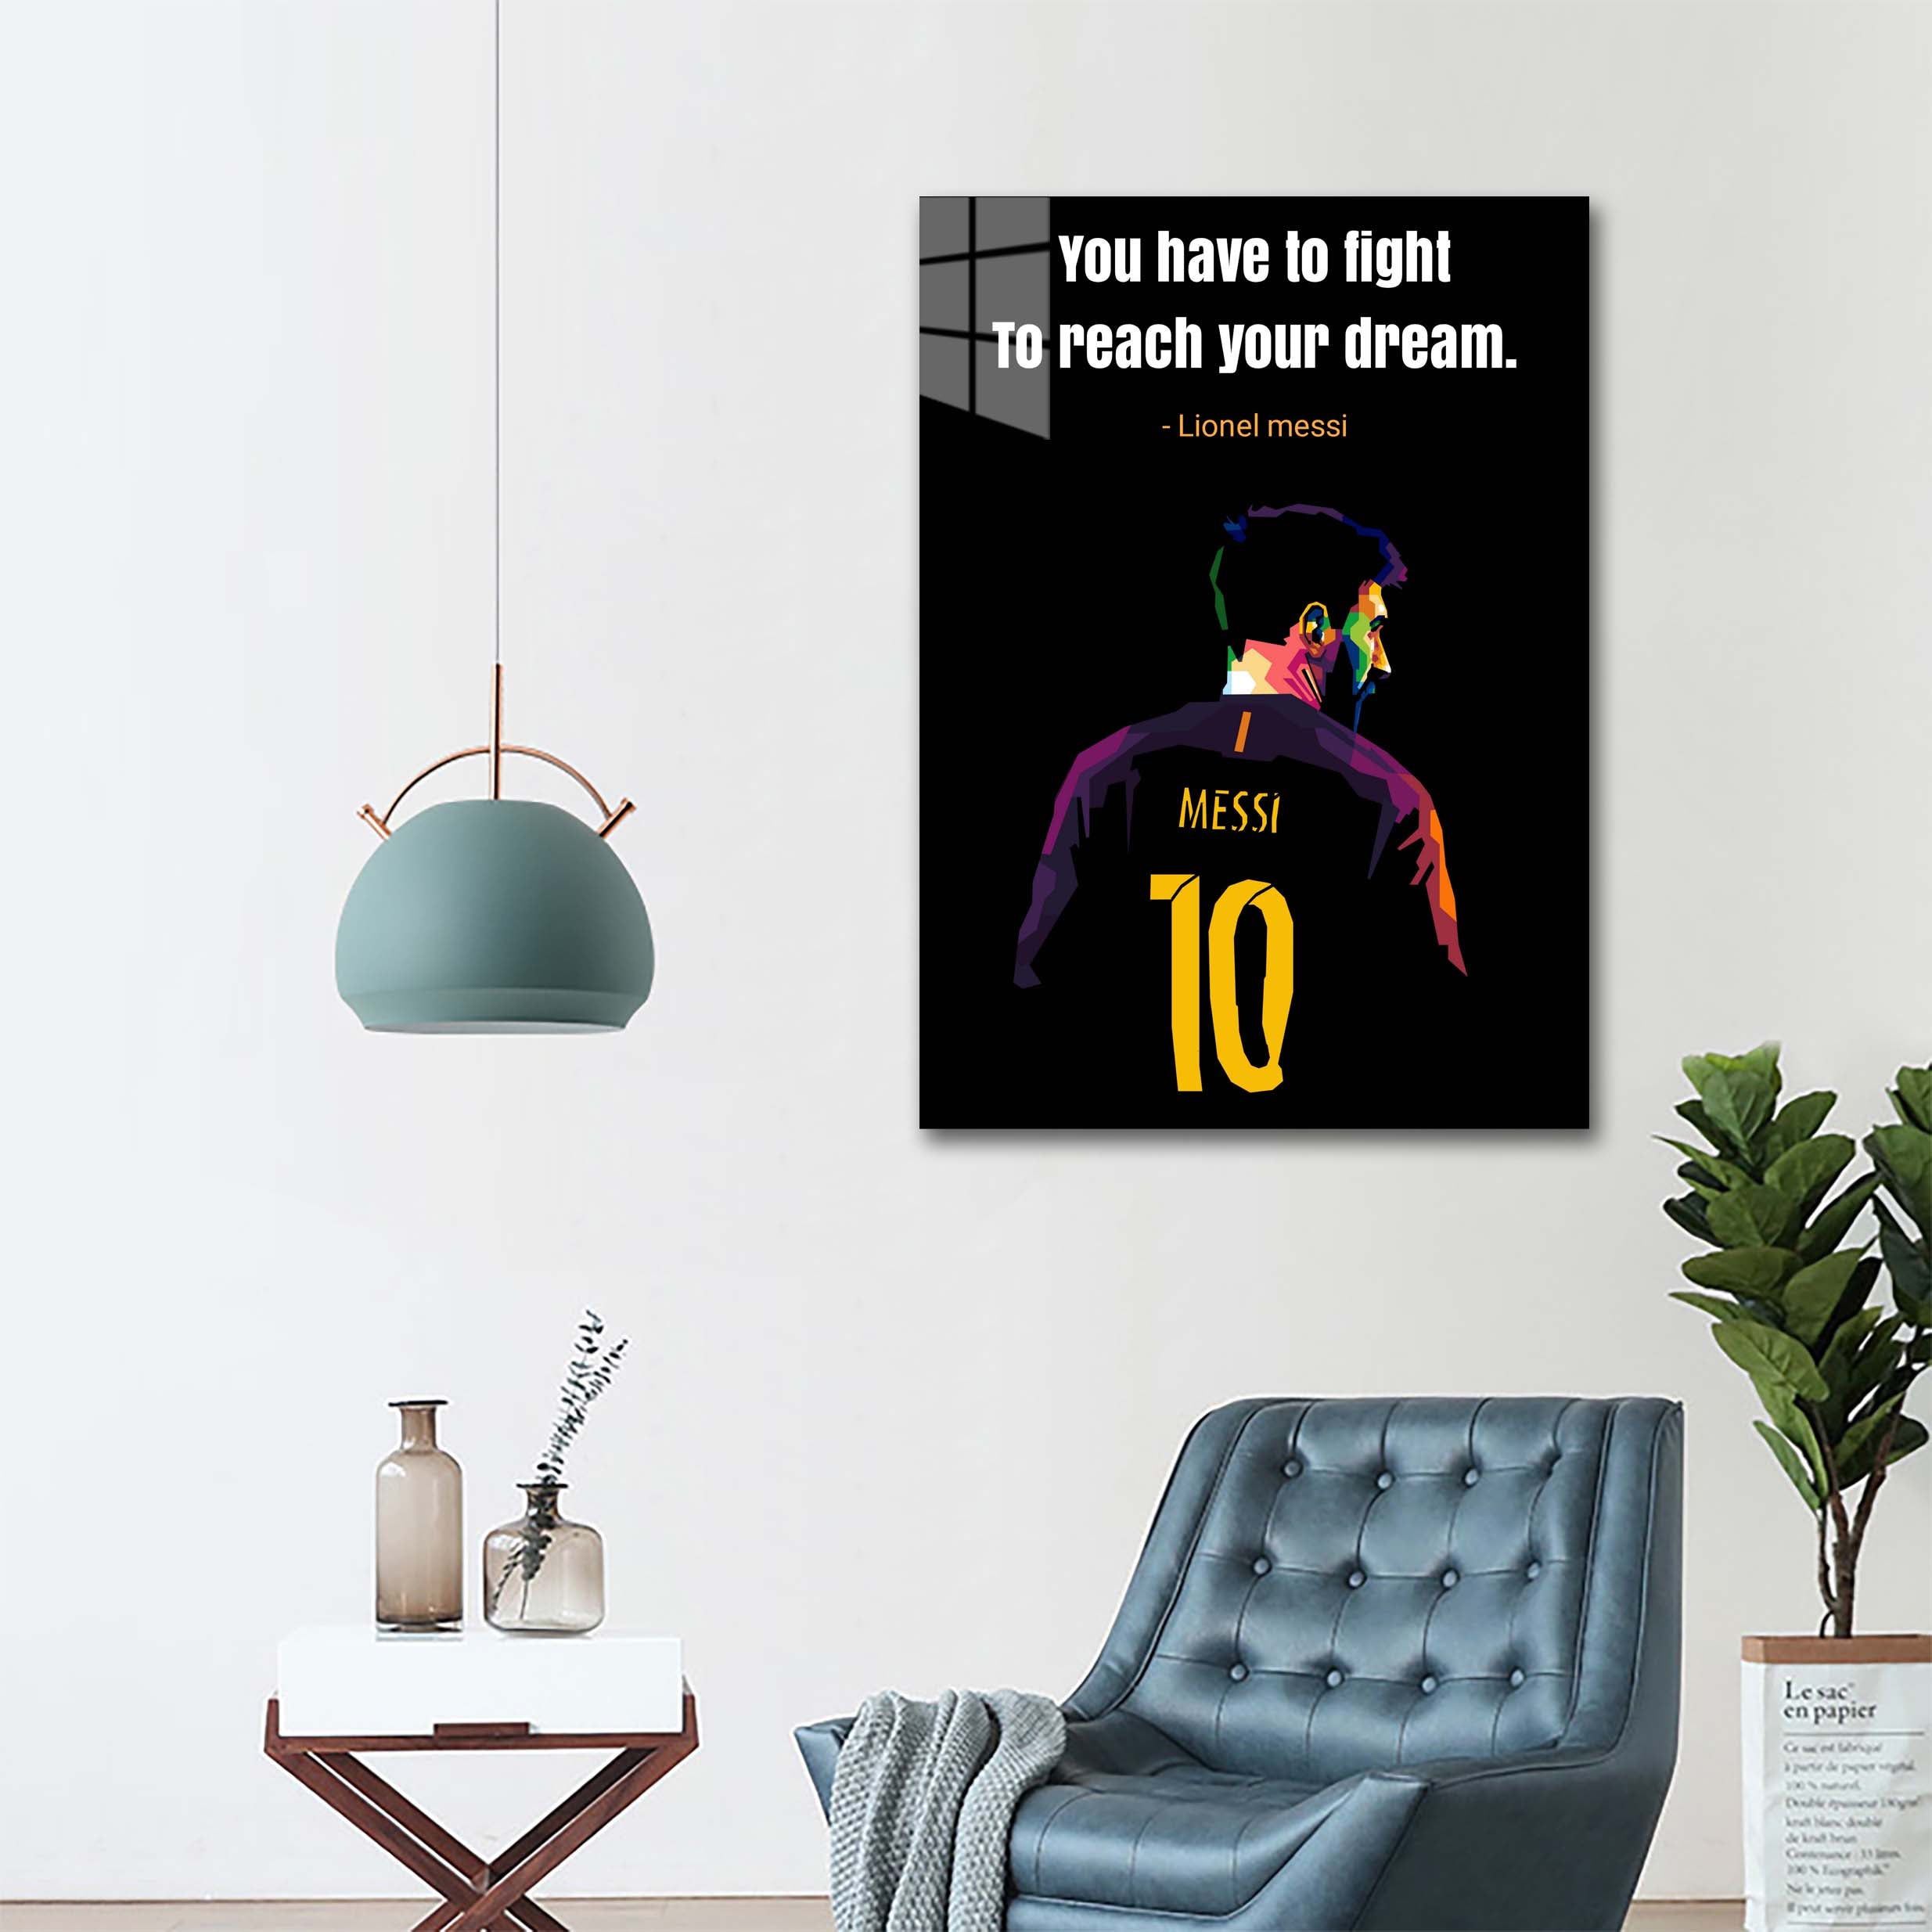 Lionel Messi Quotes Motivation-designed by @Pus Meong art